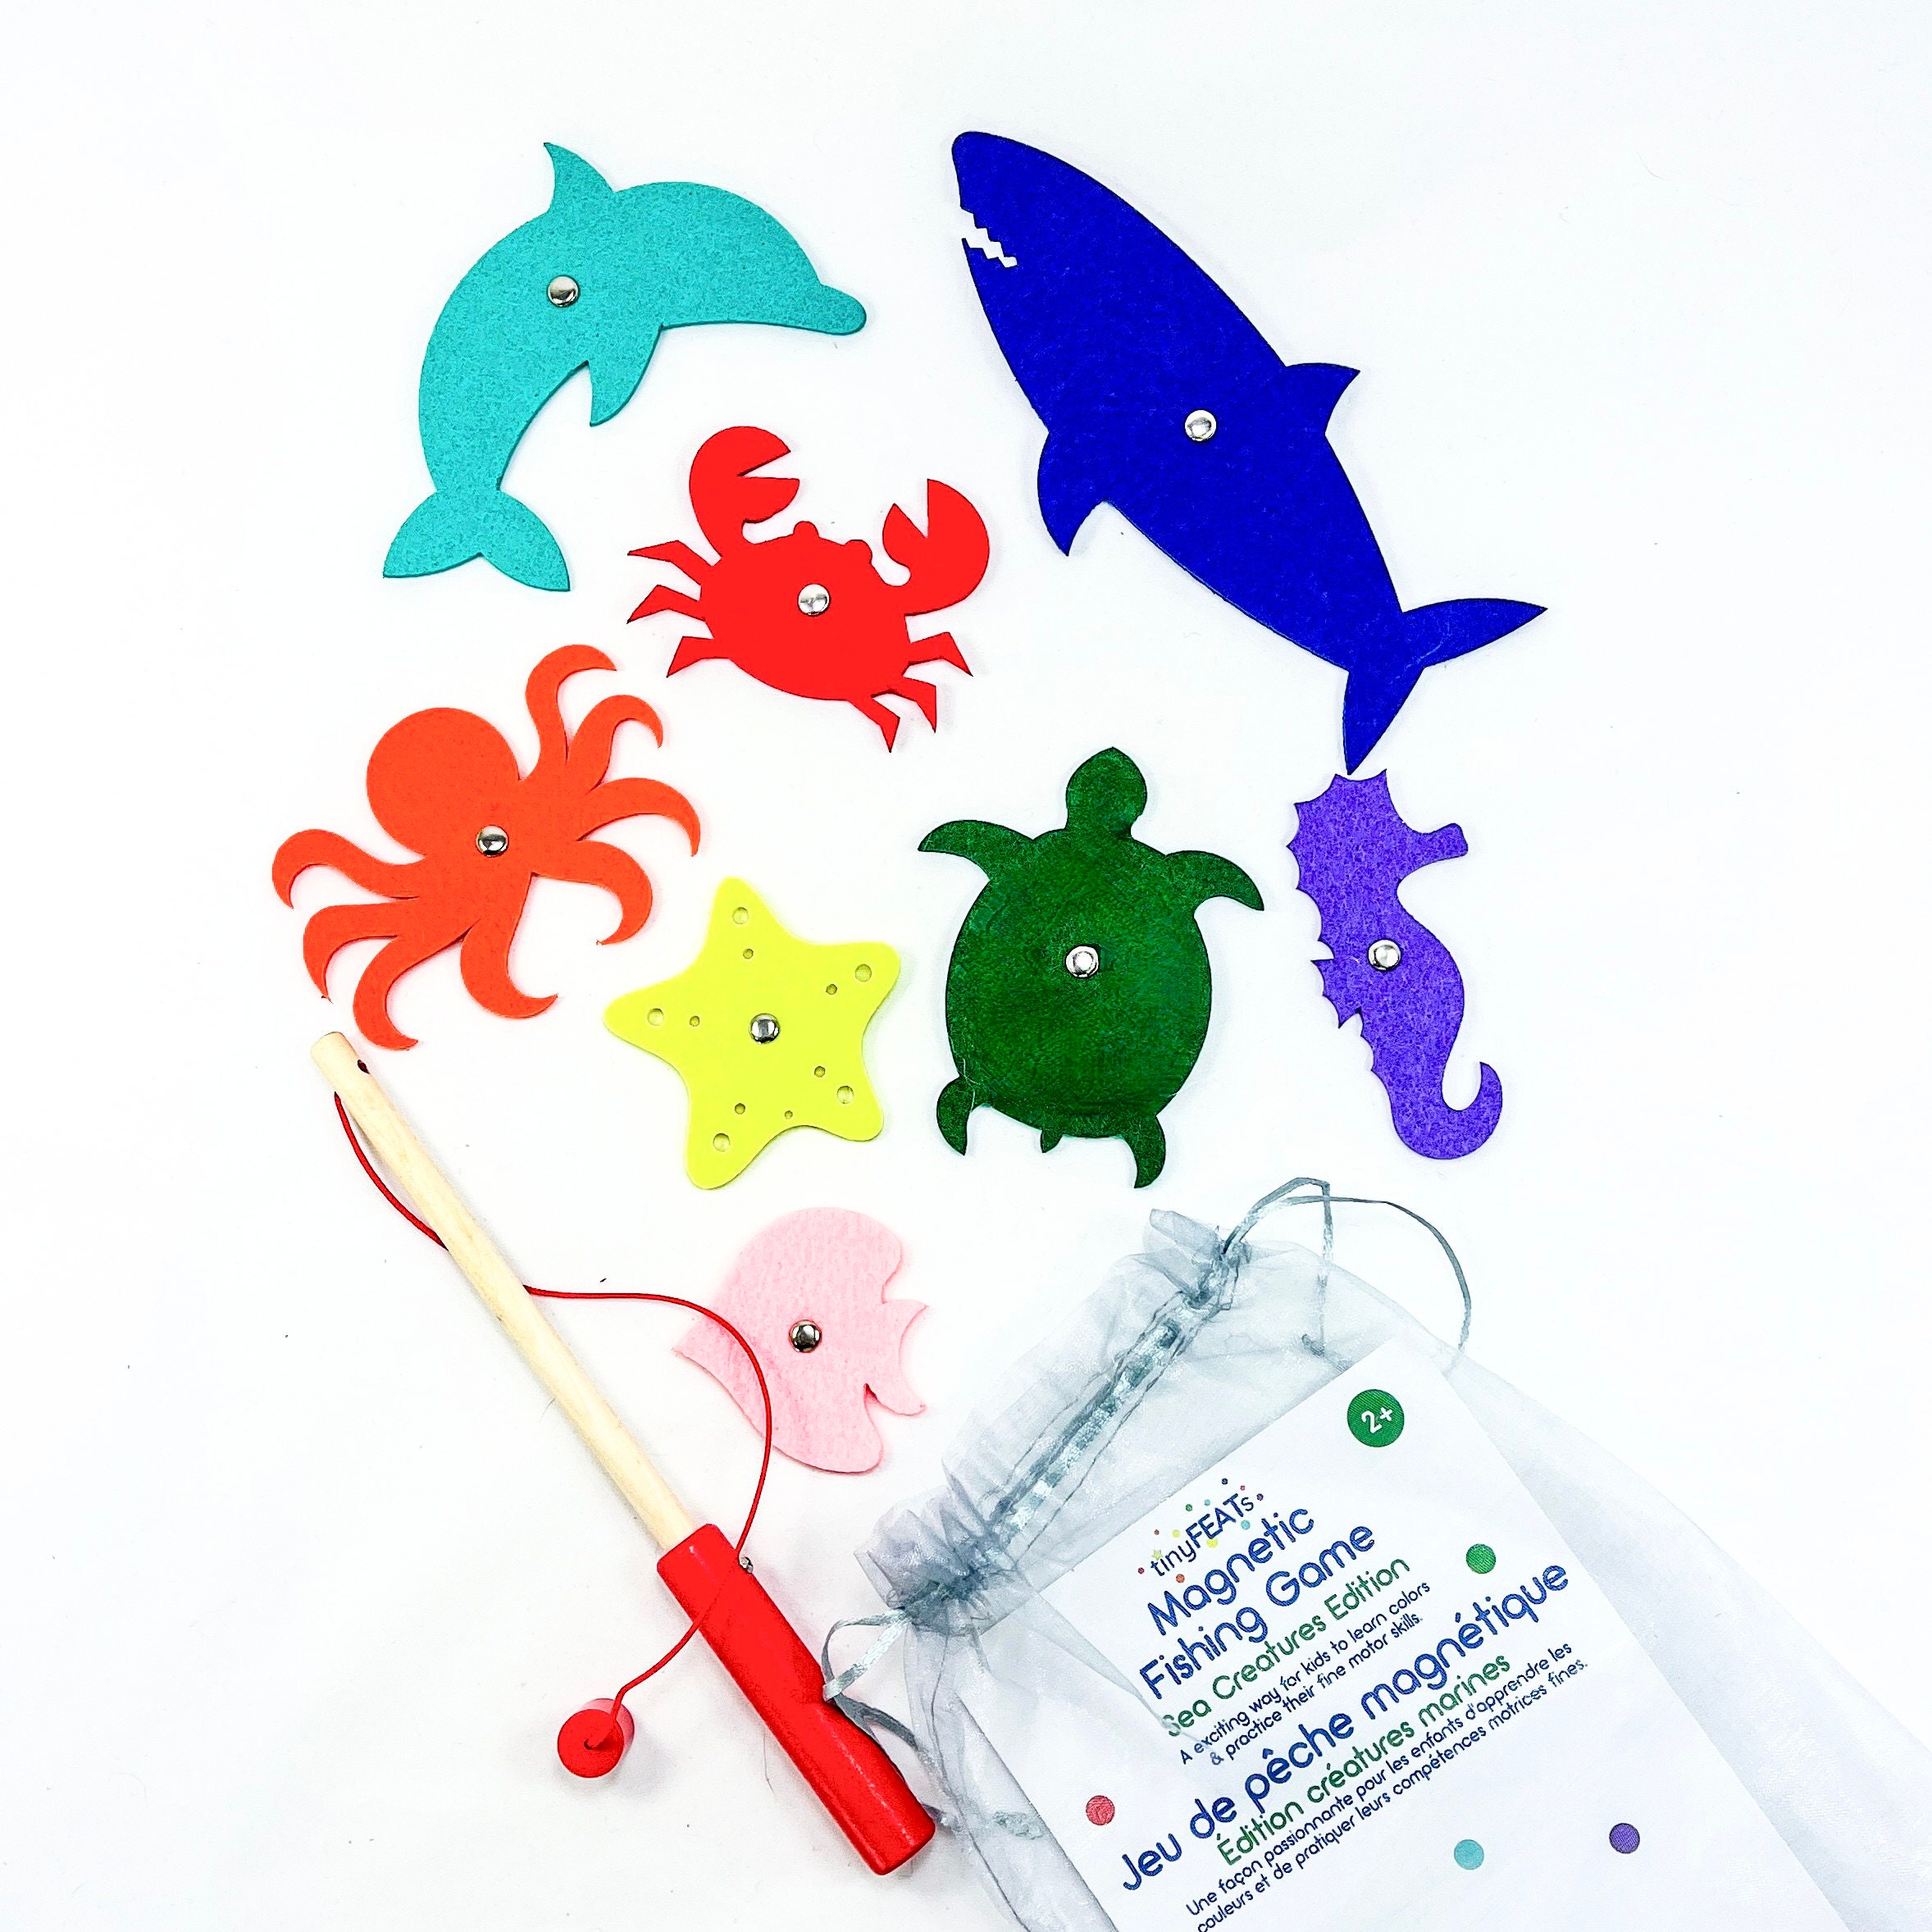 Magnetic Fishing Toy 